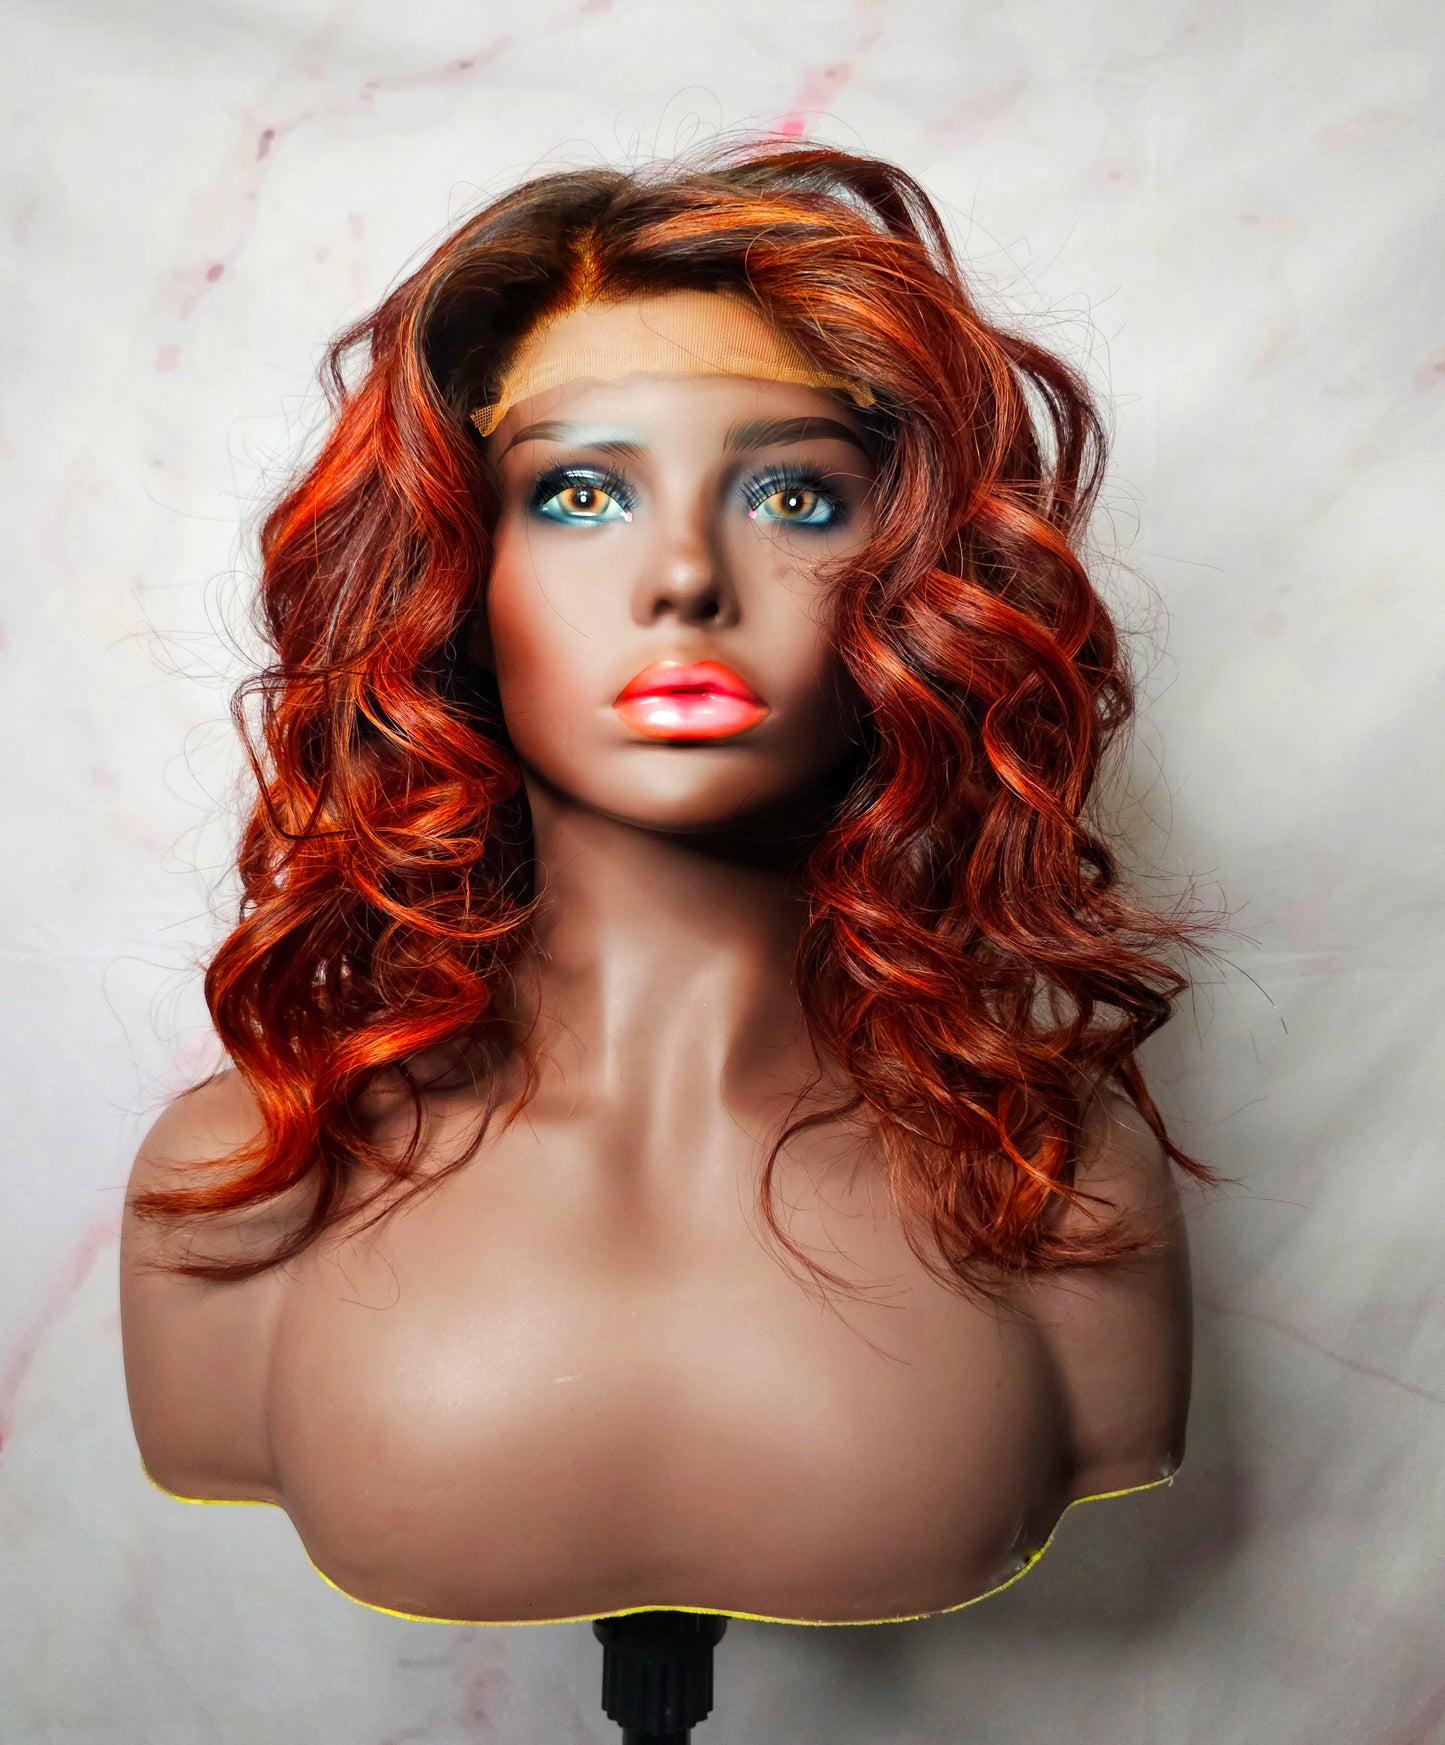 Premium virgin hair body wave wig featuring a transparent lace closure and striking red balayage highlights, offering a seamless and natural look, perfect for versatile styling.